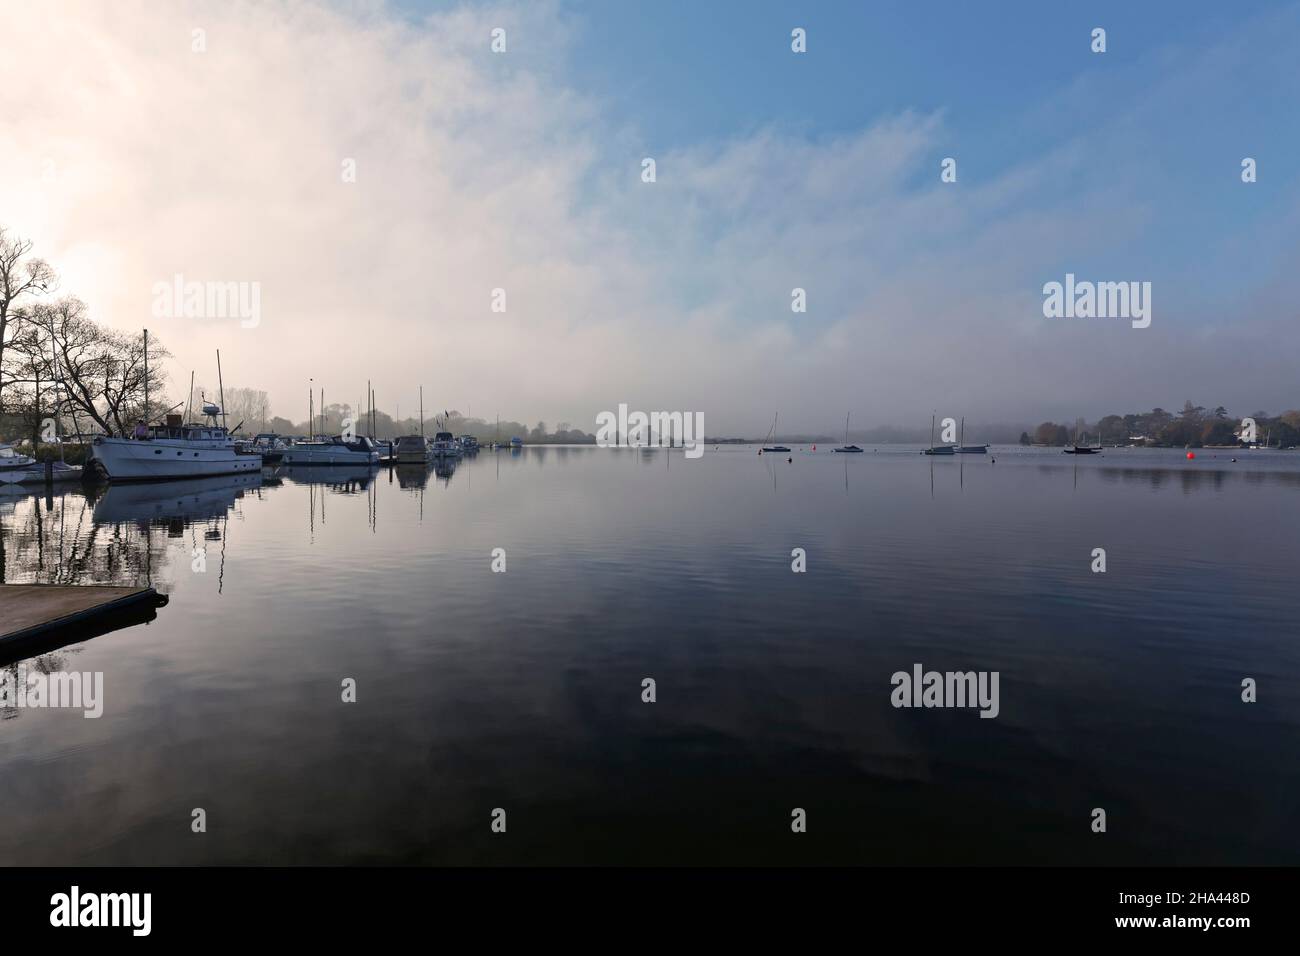 Oulton broad at Dusk with mist and reflections on the water. Stock Photo